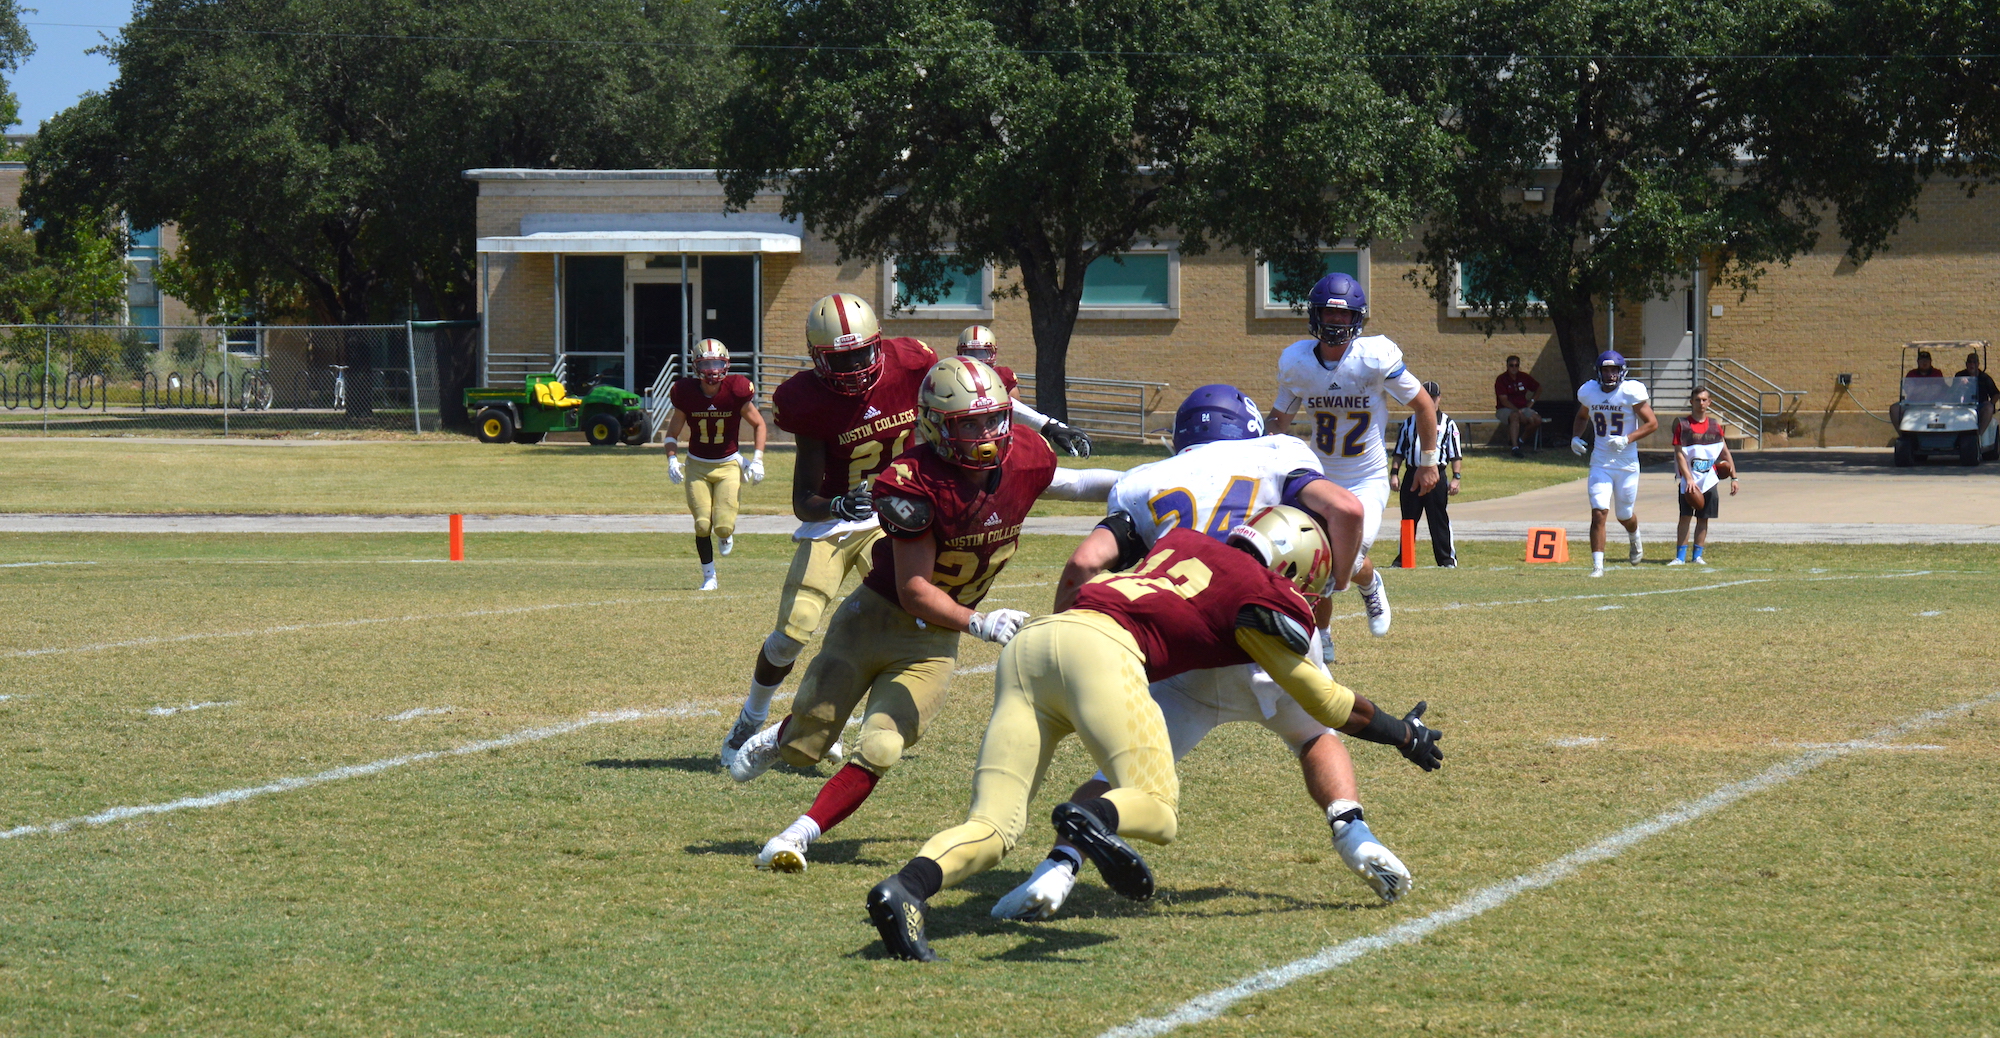 Offensive Miscues Lead to First Loss for 'Roo Football